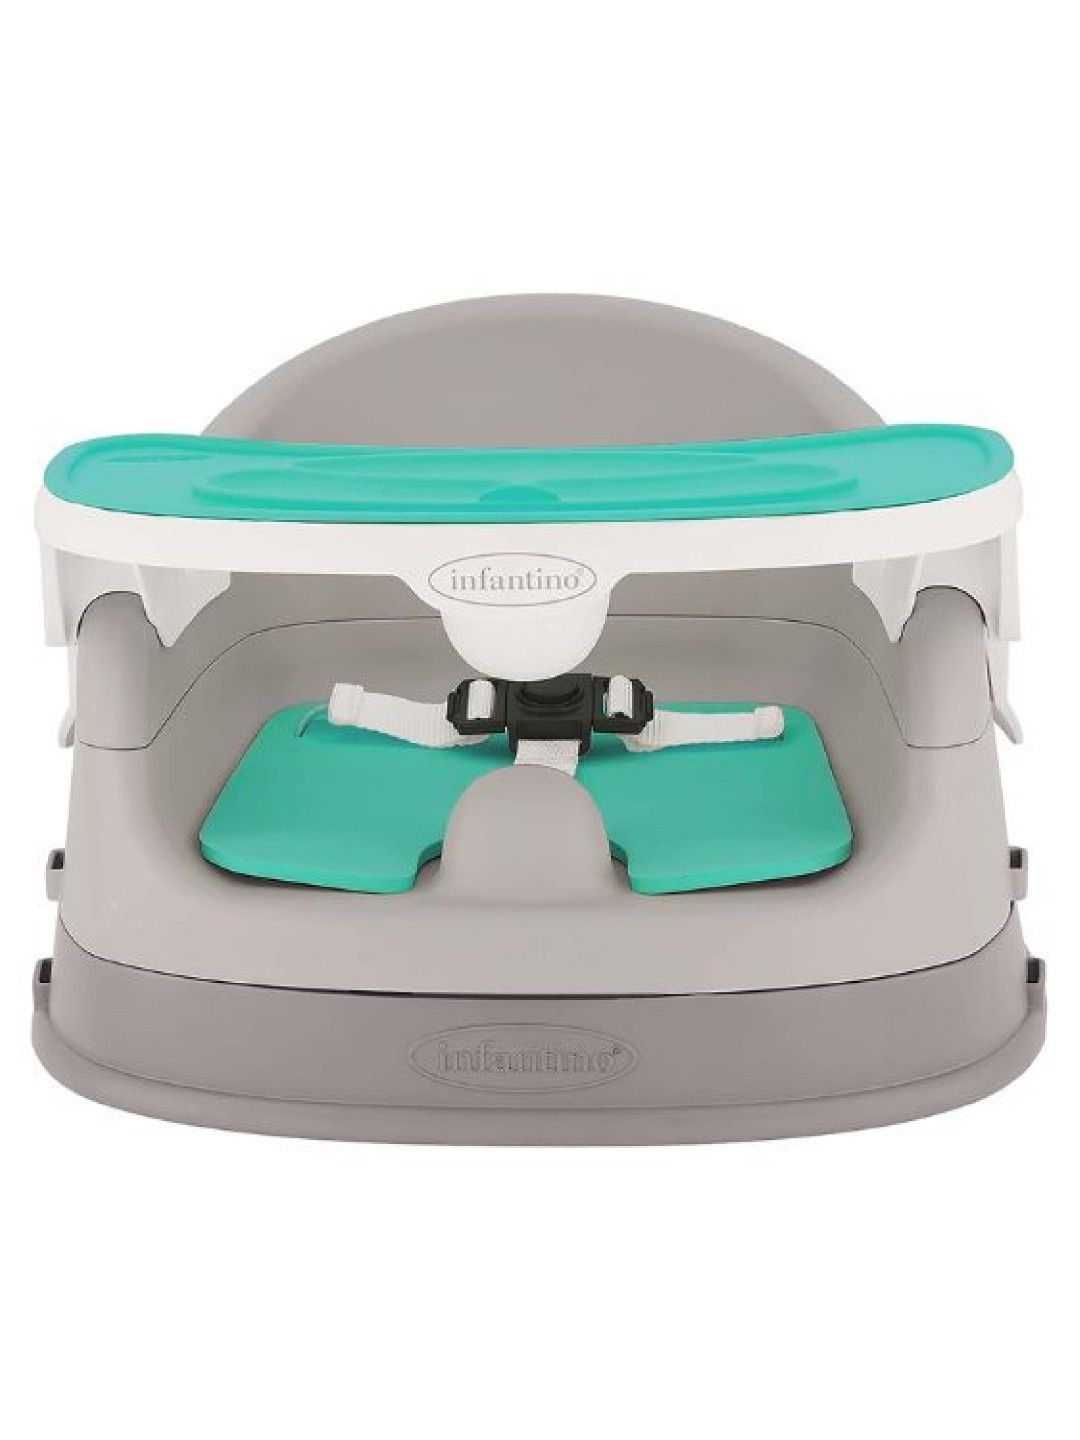 Infantino Grow with me 4-in-1 Two-Can-Dine Deluxe Feeding Booster Seat